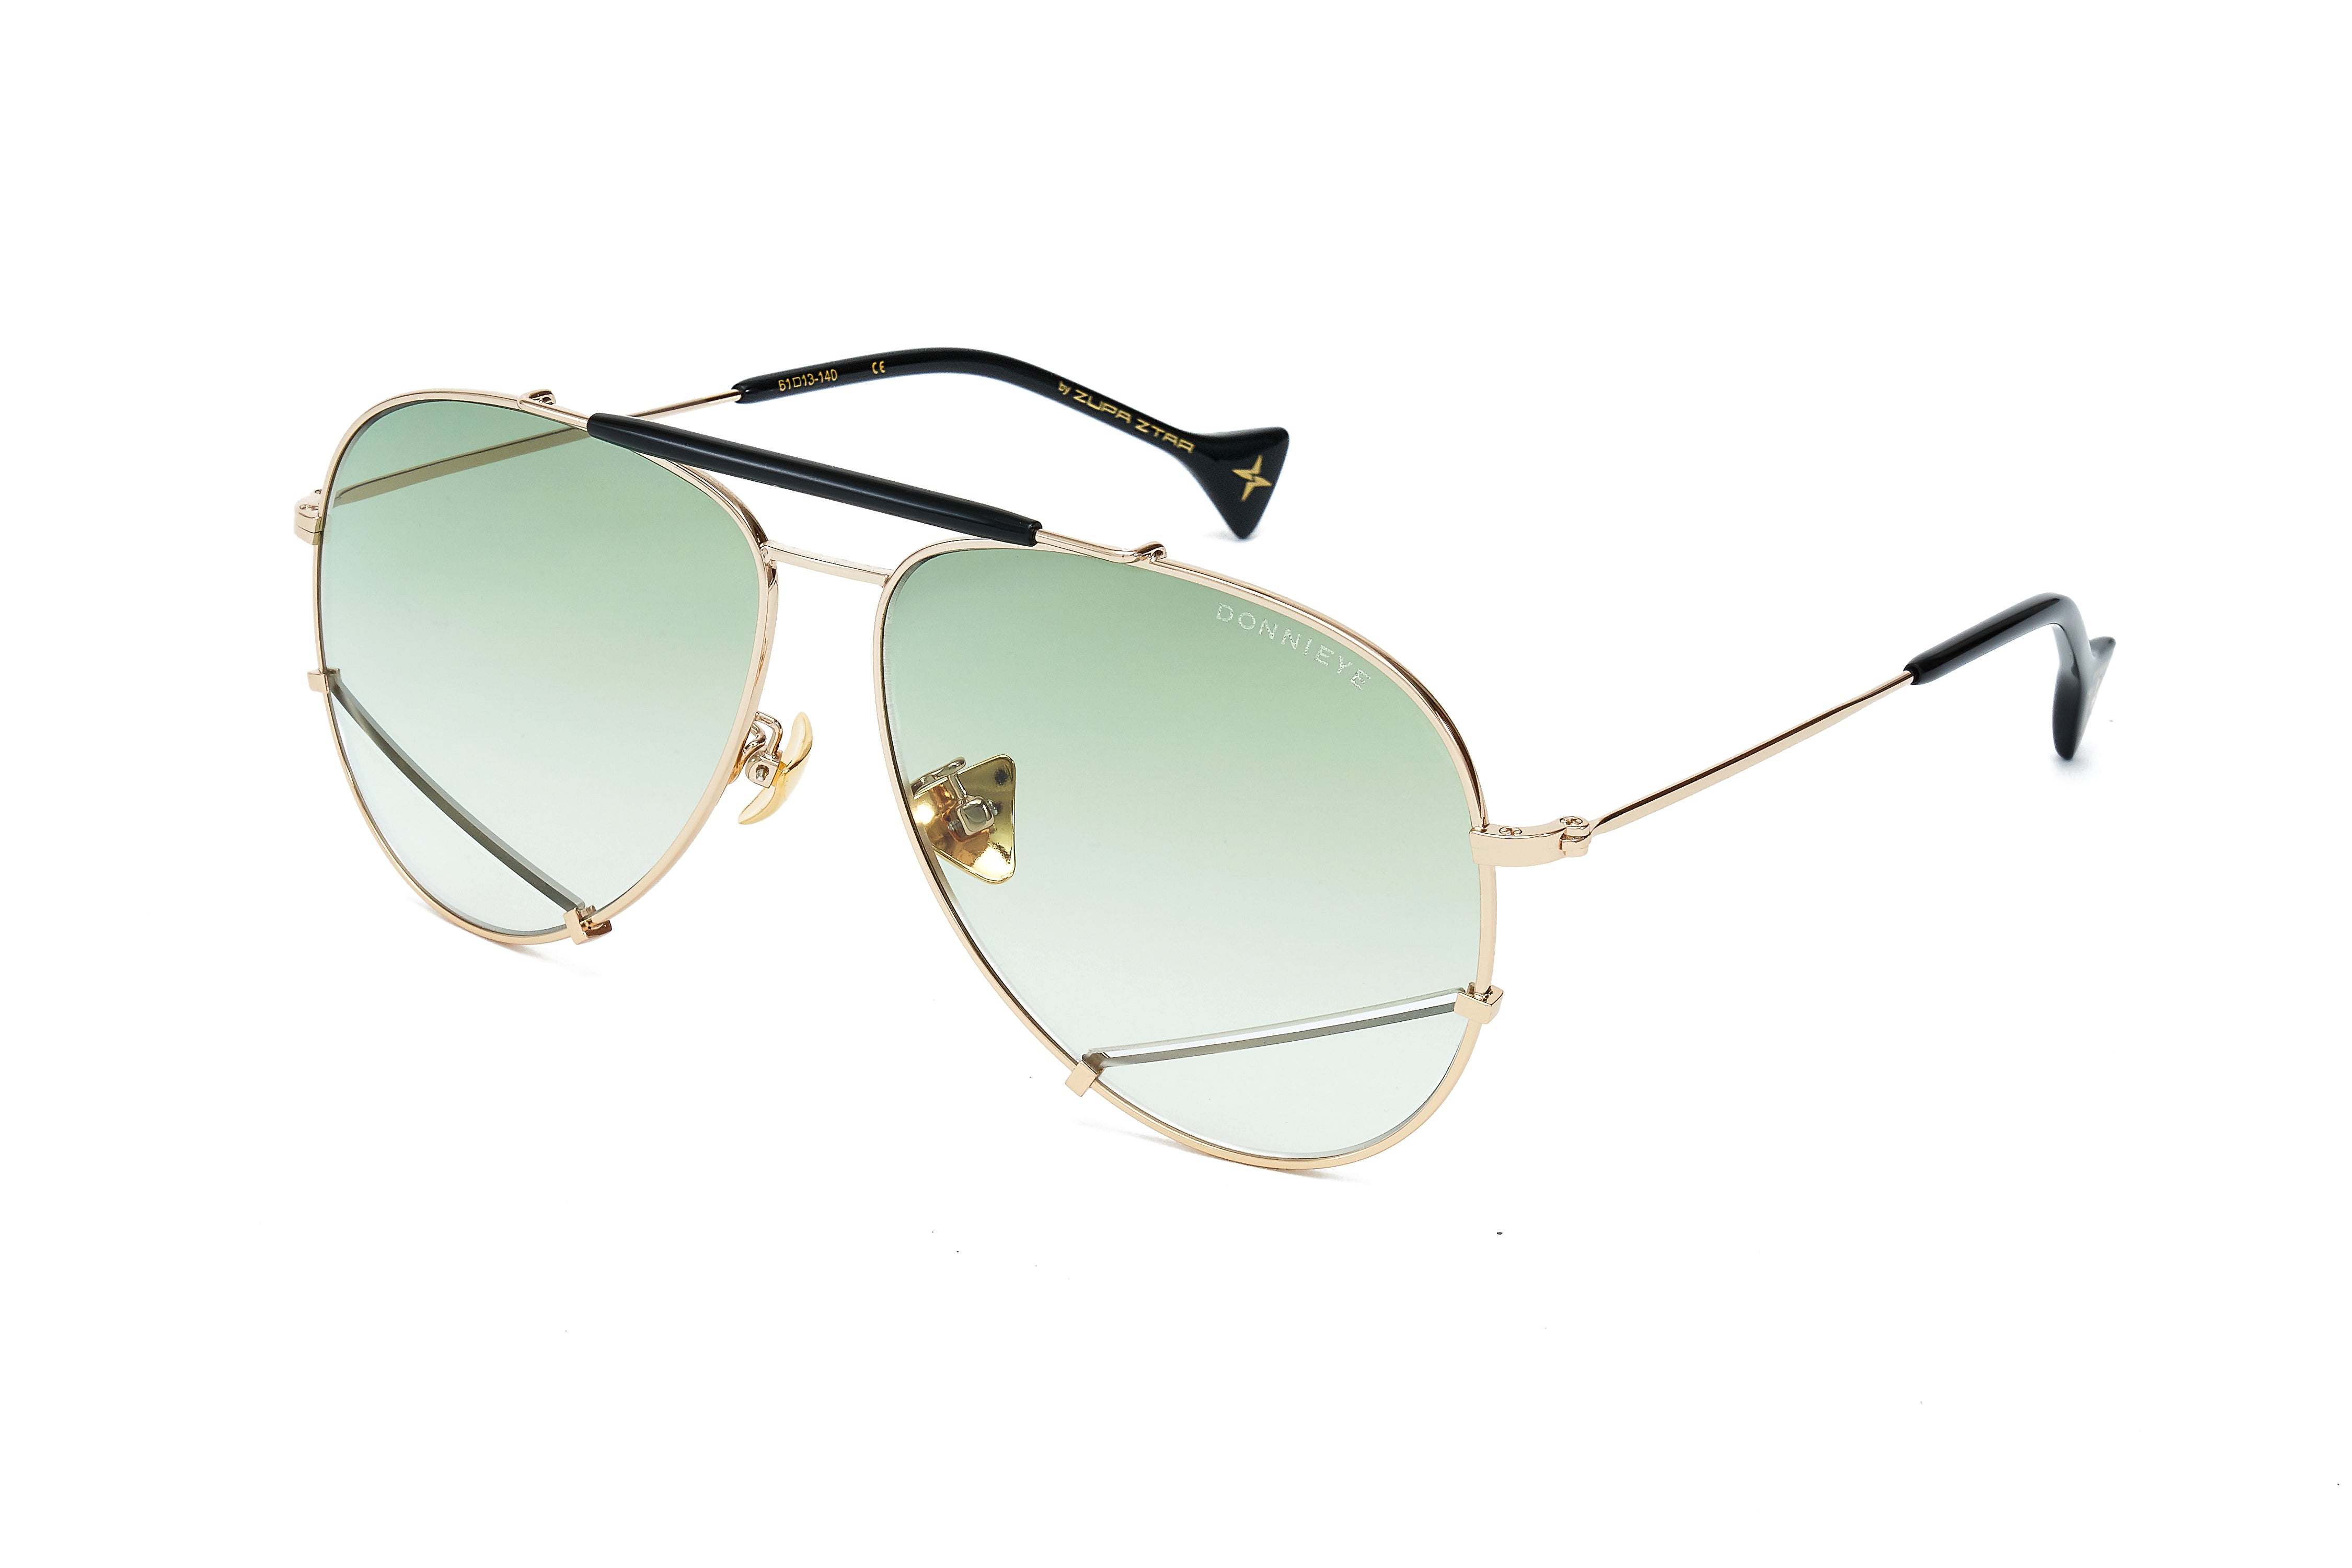 SUNGLASSES – DonniEYE Online Store